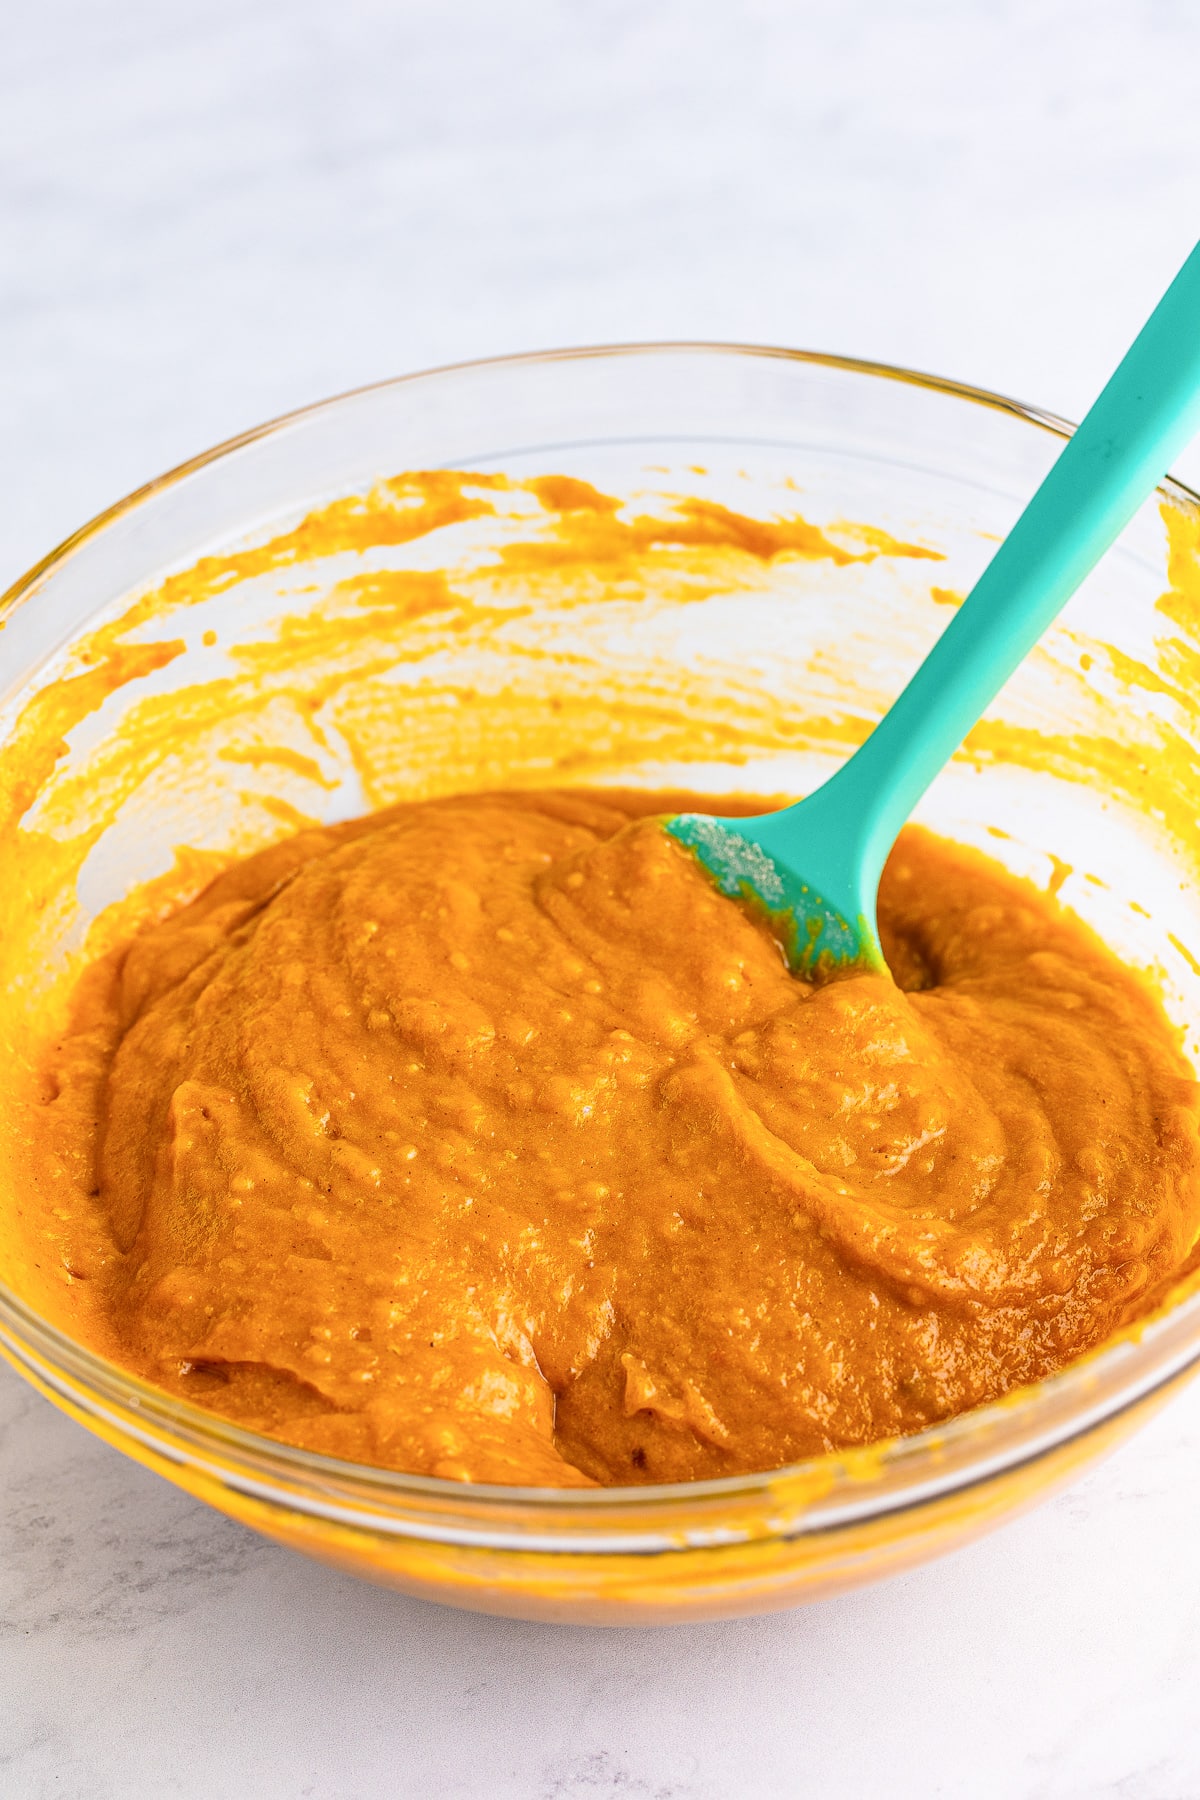 Pumpkin cake batter after all ingredients are mixed in a bowl.